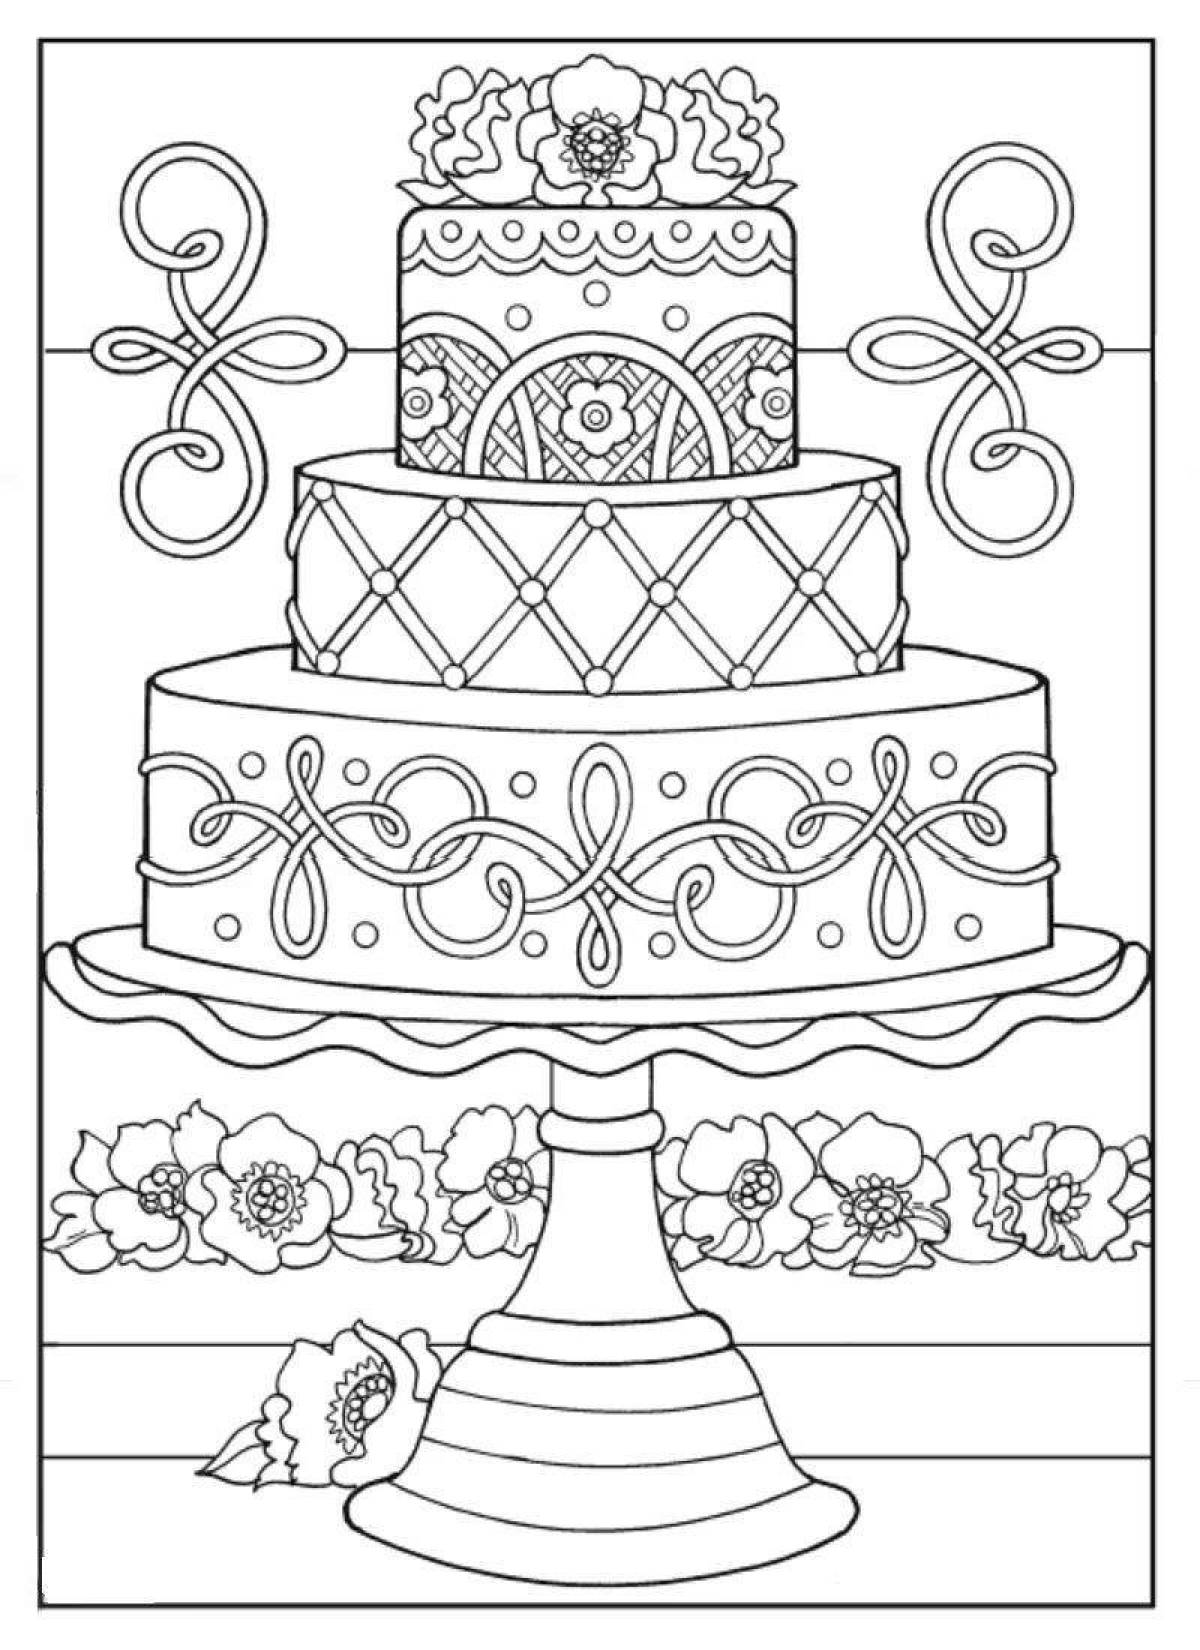 Exquisite coloring cake for girls